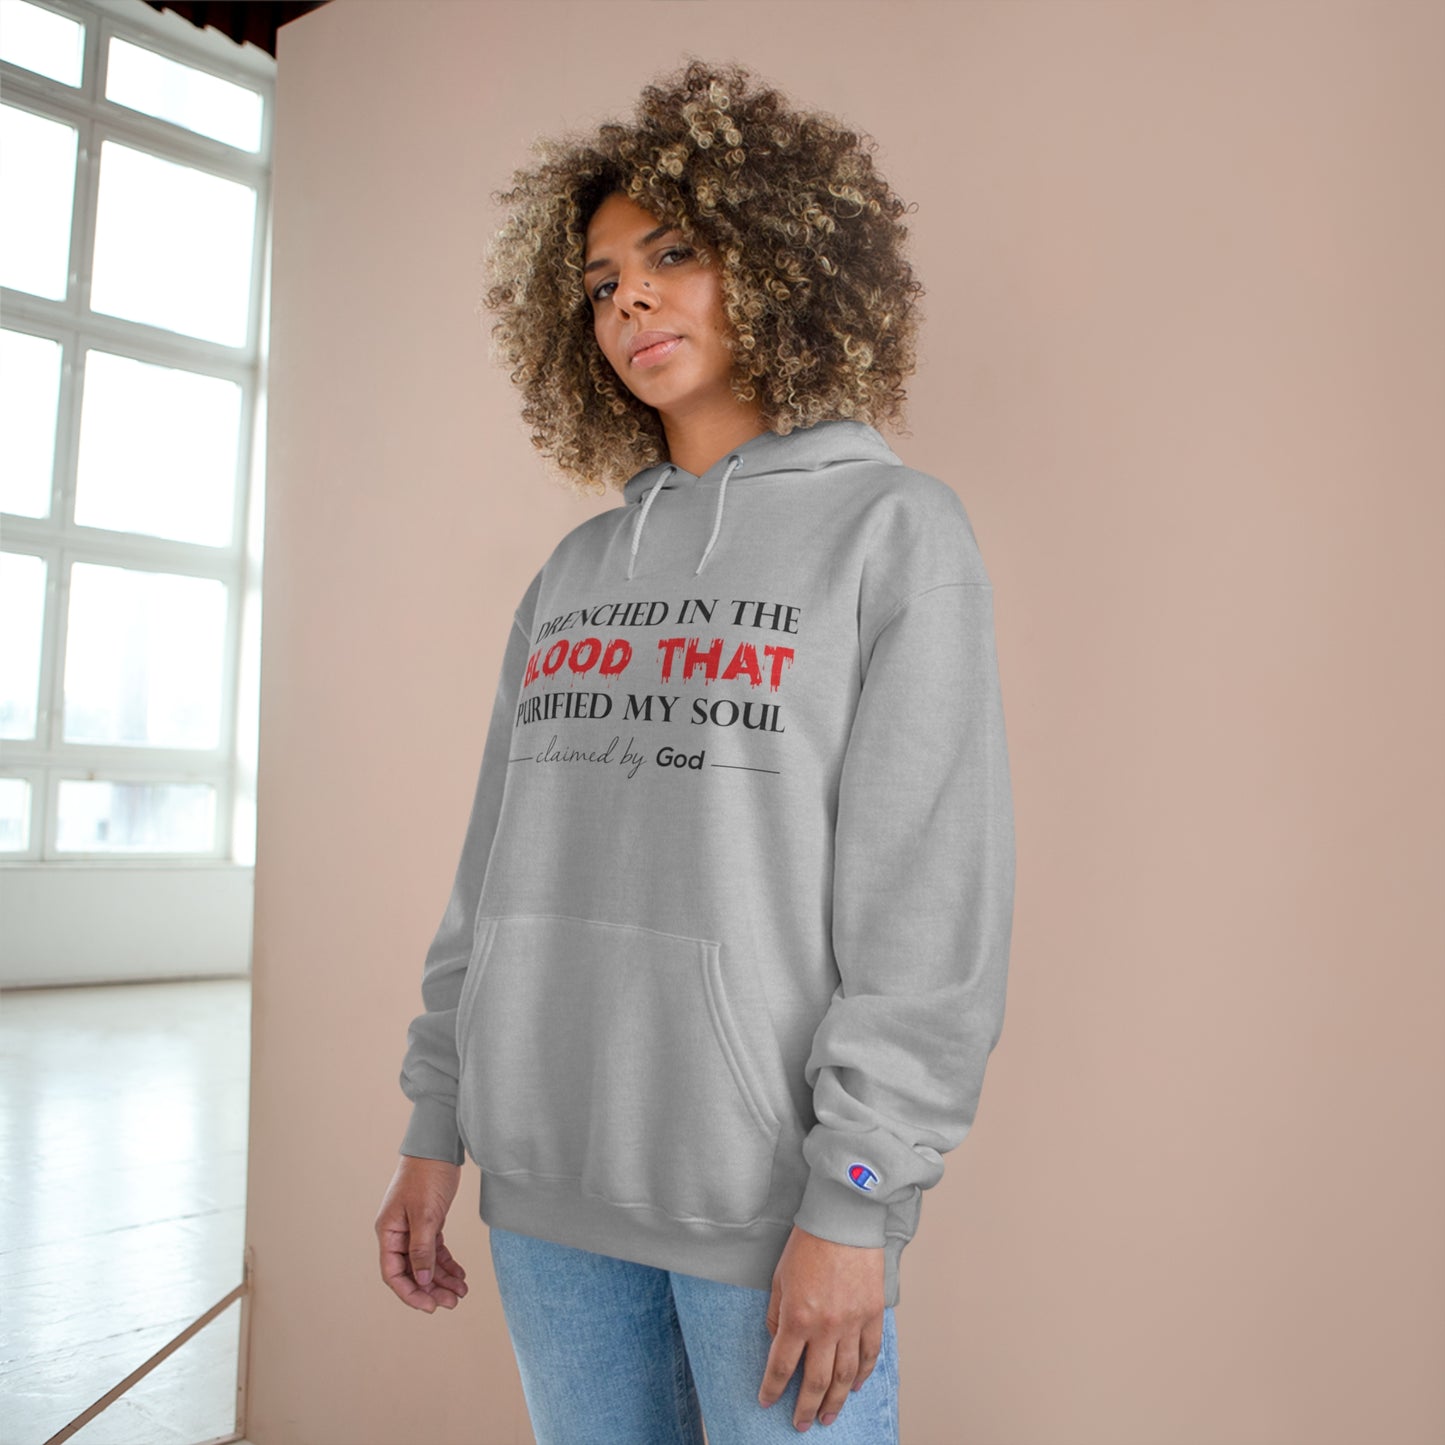 Drenched In The Blood That Purified My Soul Unisex Champion Hoodie